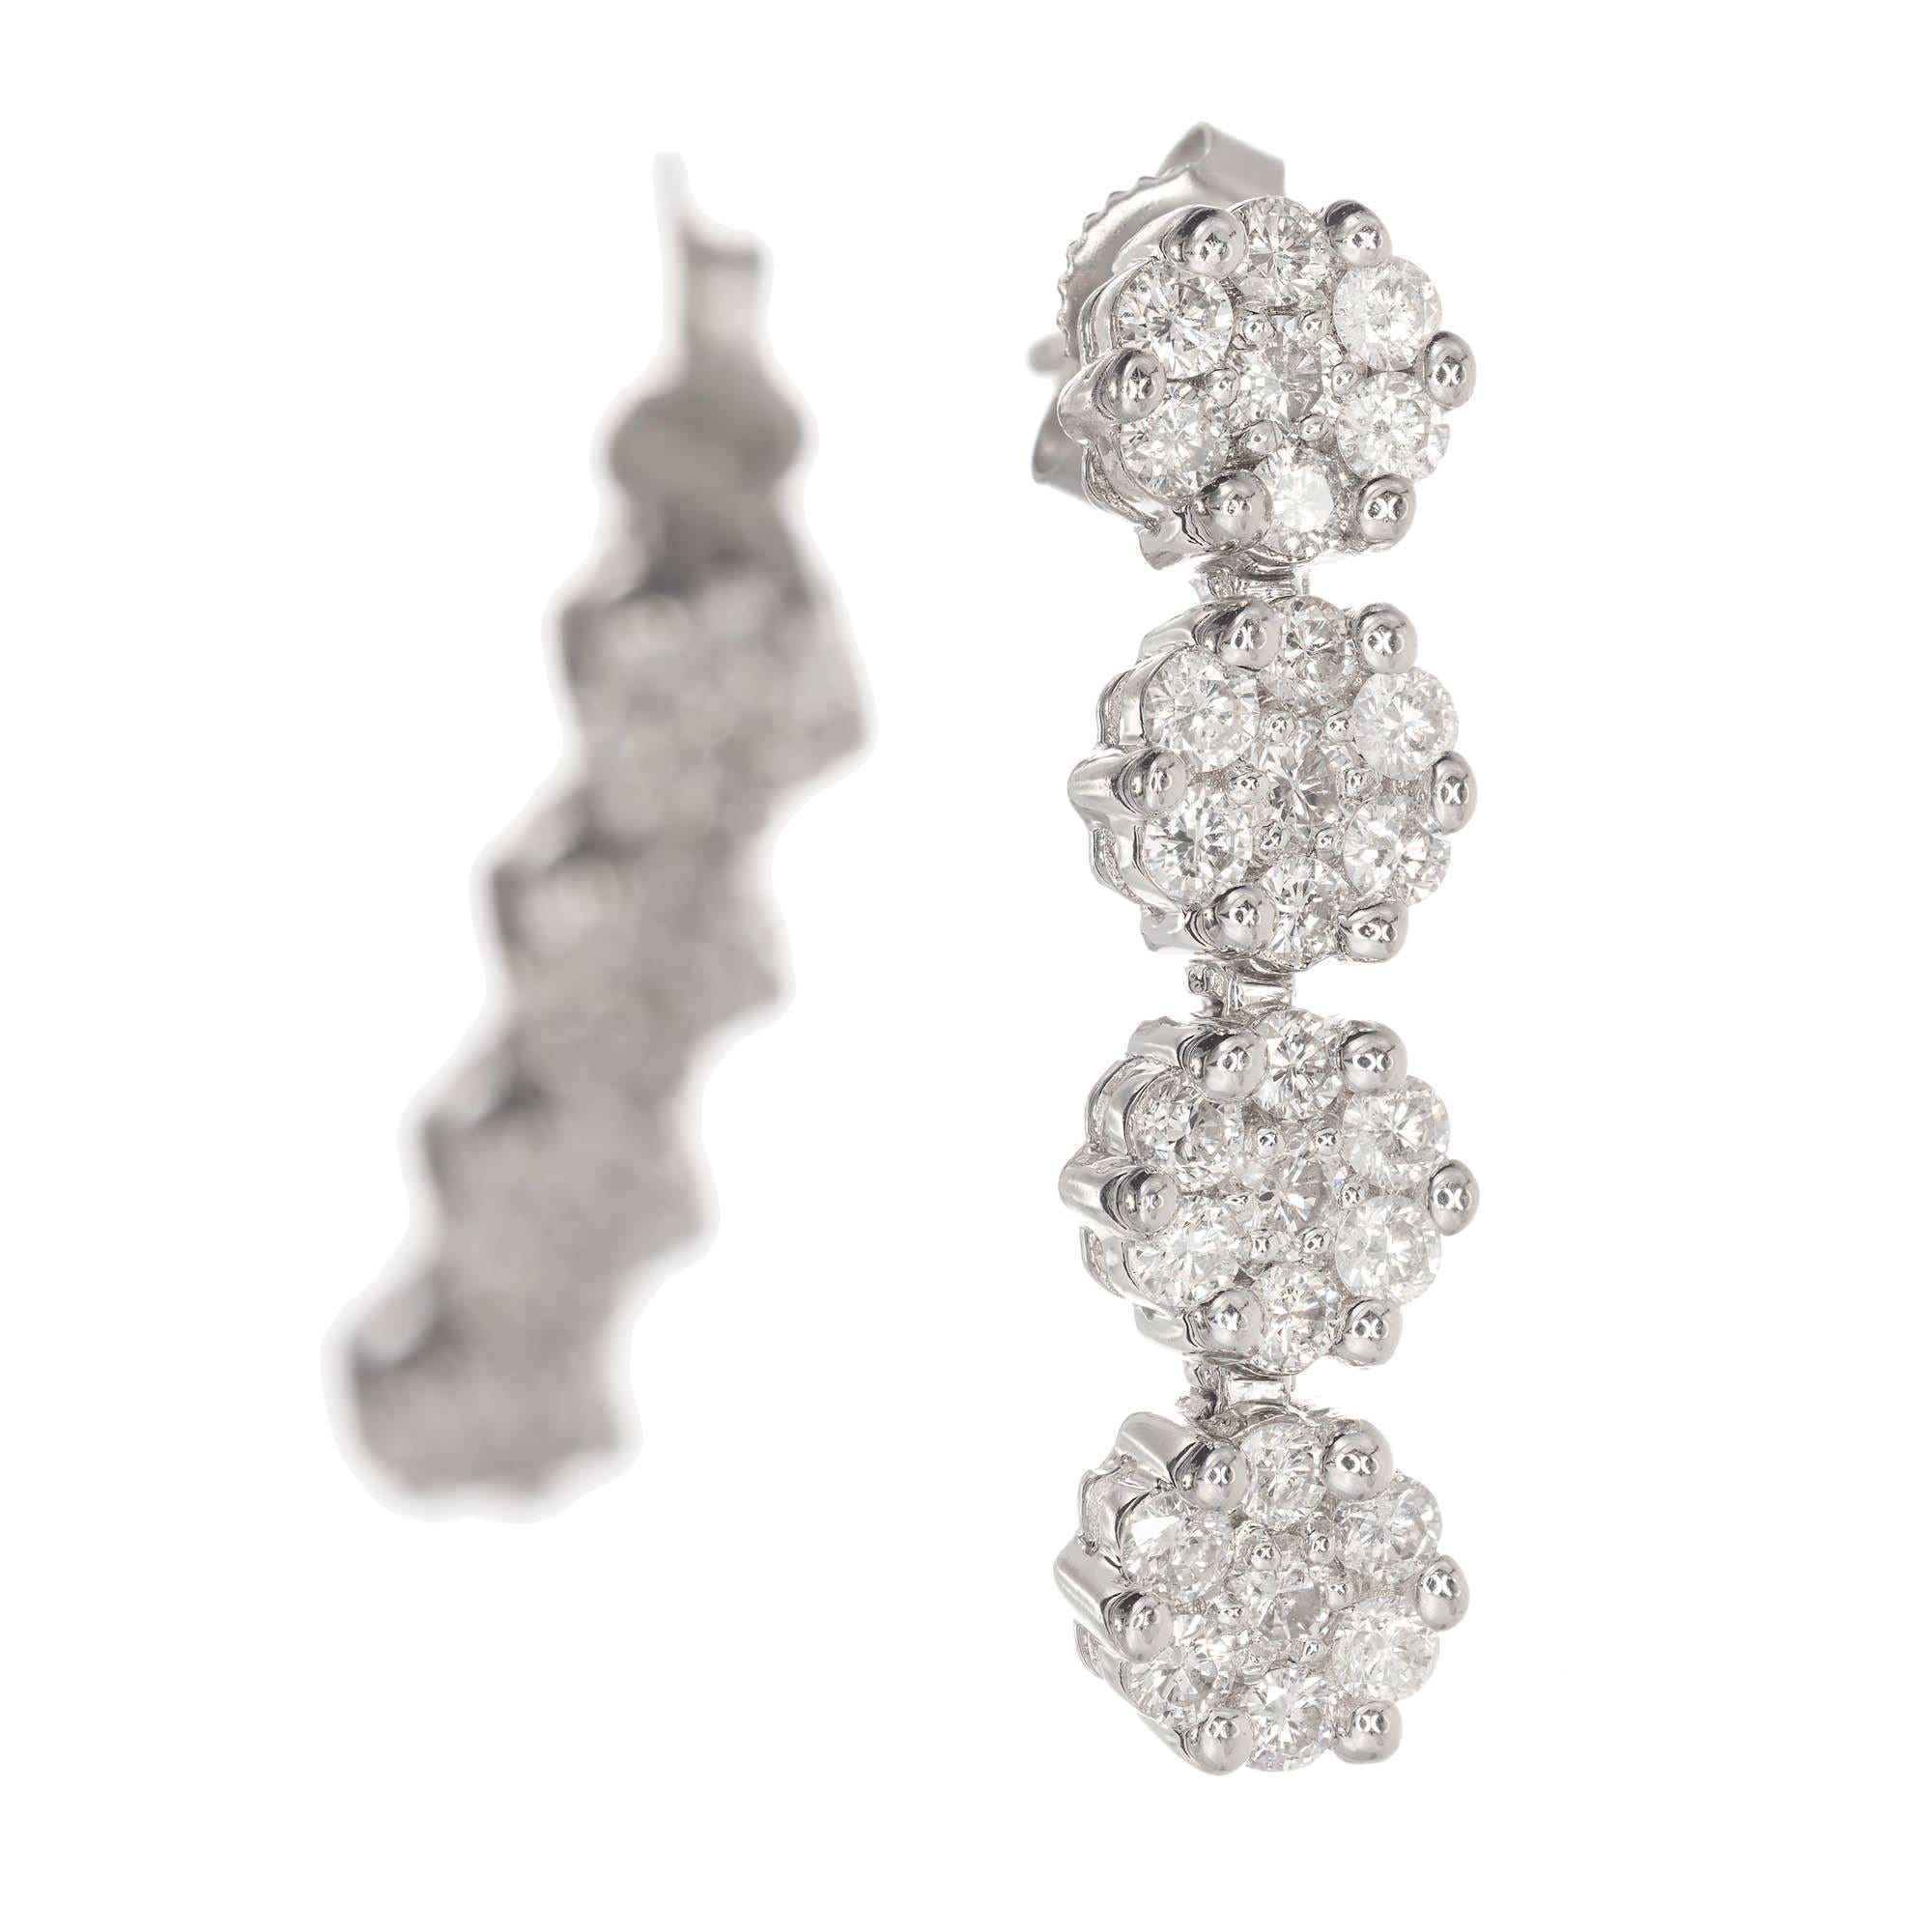 14k white gold diamond cluster drop dangle earrings. Four clusters of round brilliant cut diamonds dangle form each other to create these drop earrings.

56 round brilliant cut H-I SI diamonds 1.8-2.0mm Approximate 1.20 total carat weight
14k White